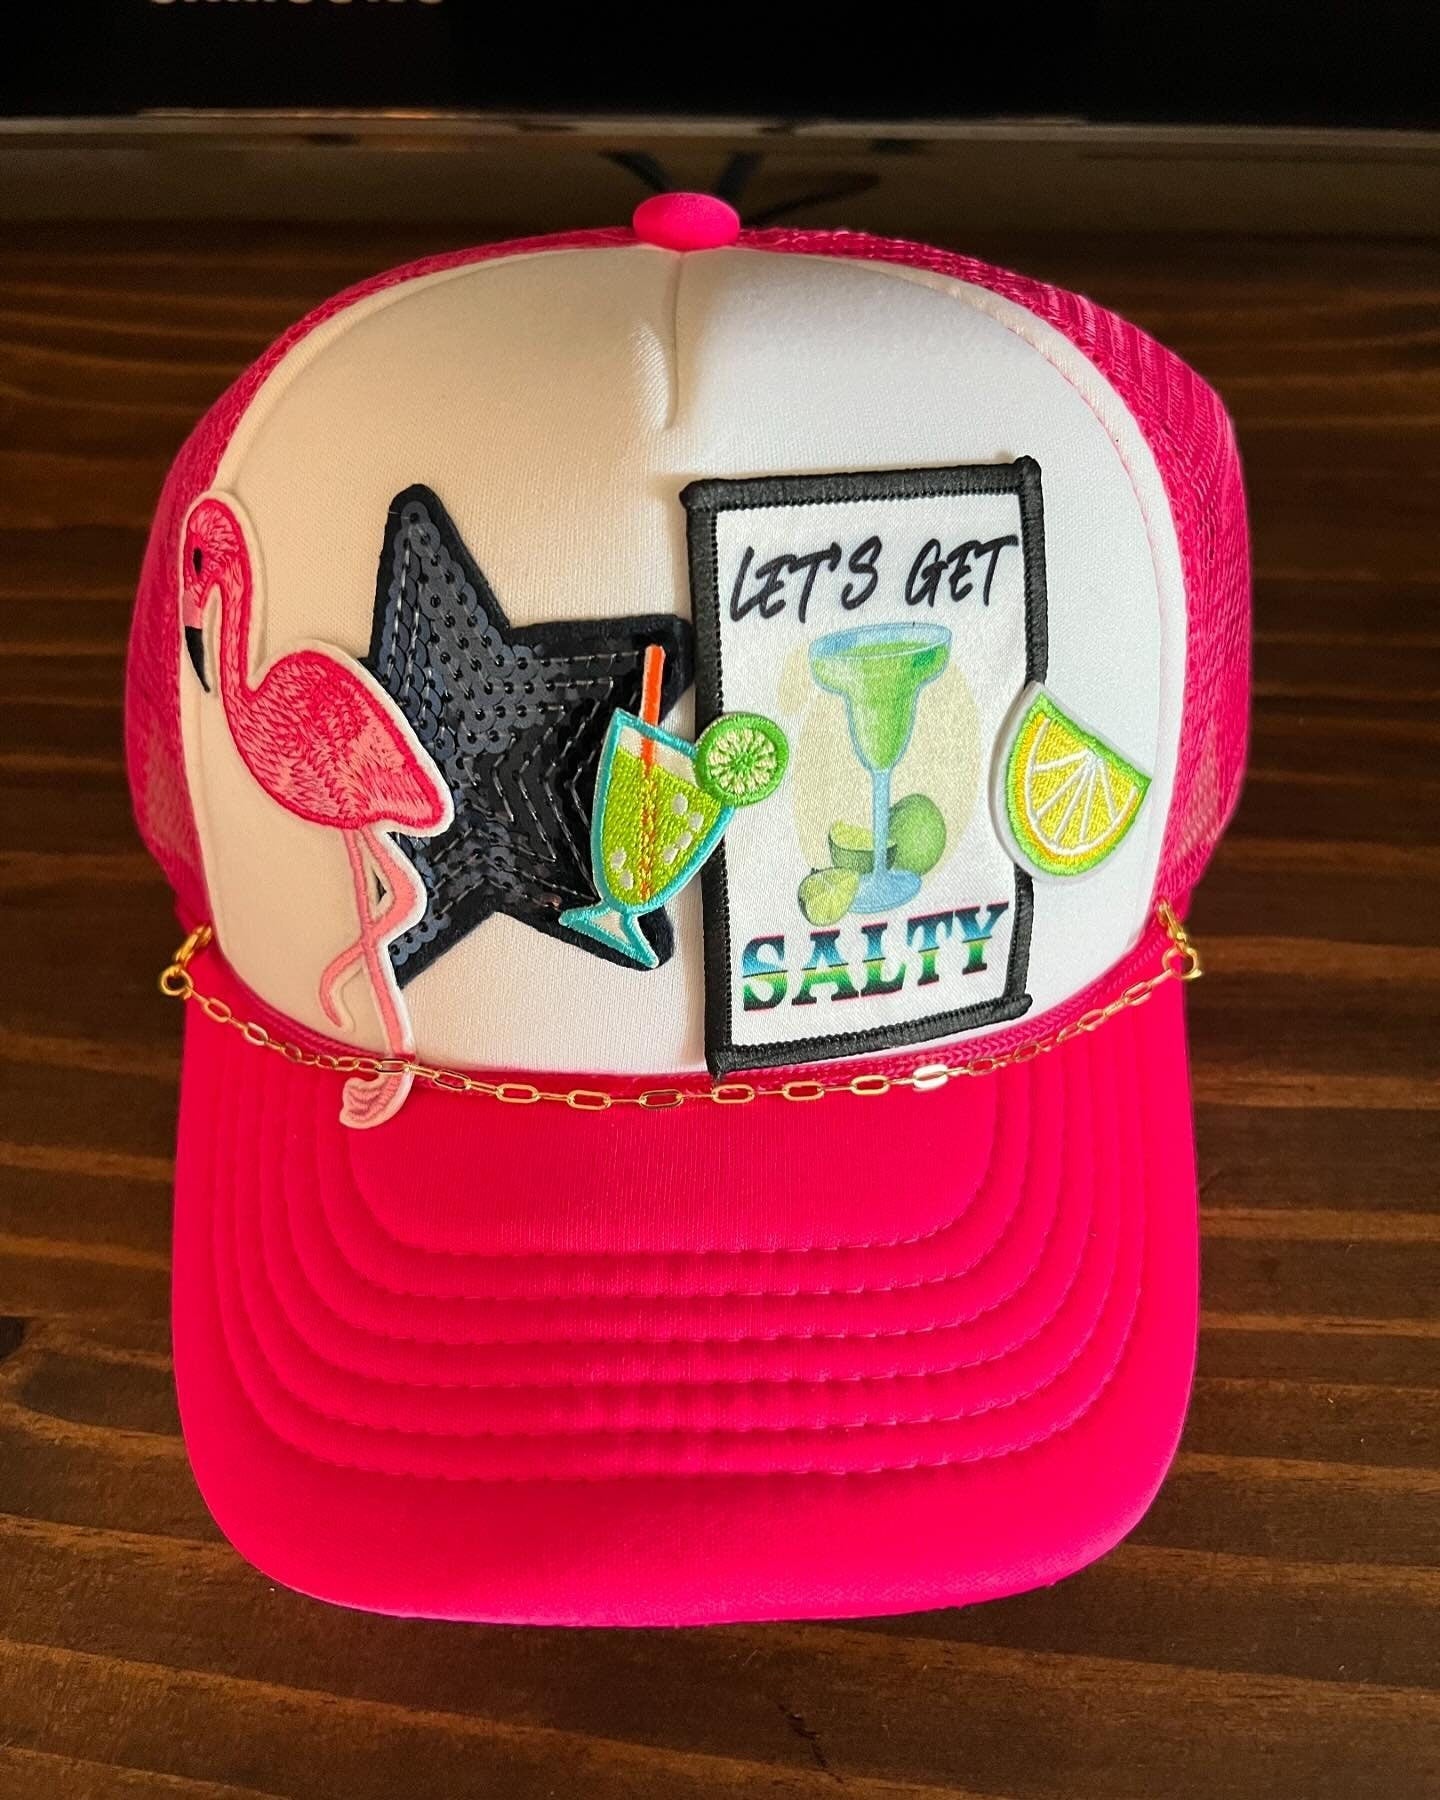 Let's get Salty Trucker hat, Pink trucker hat, hat with patches, womens hat